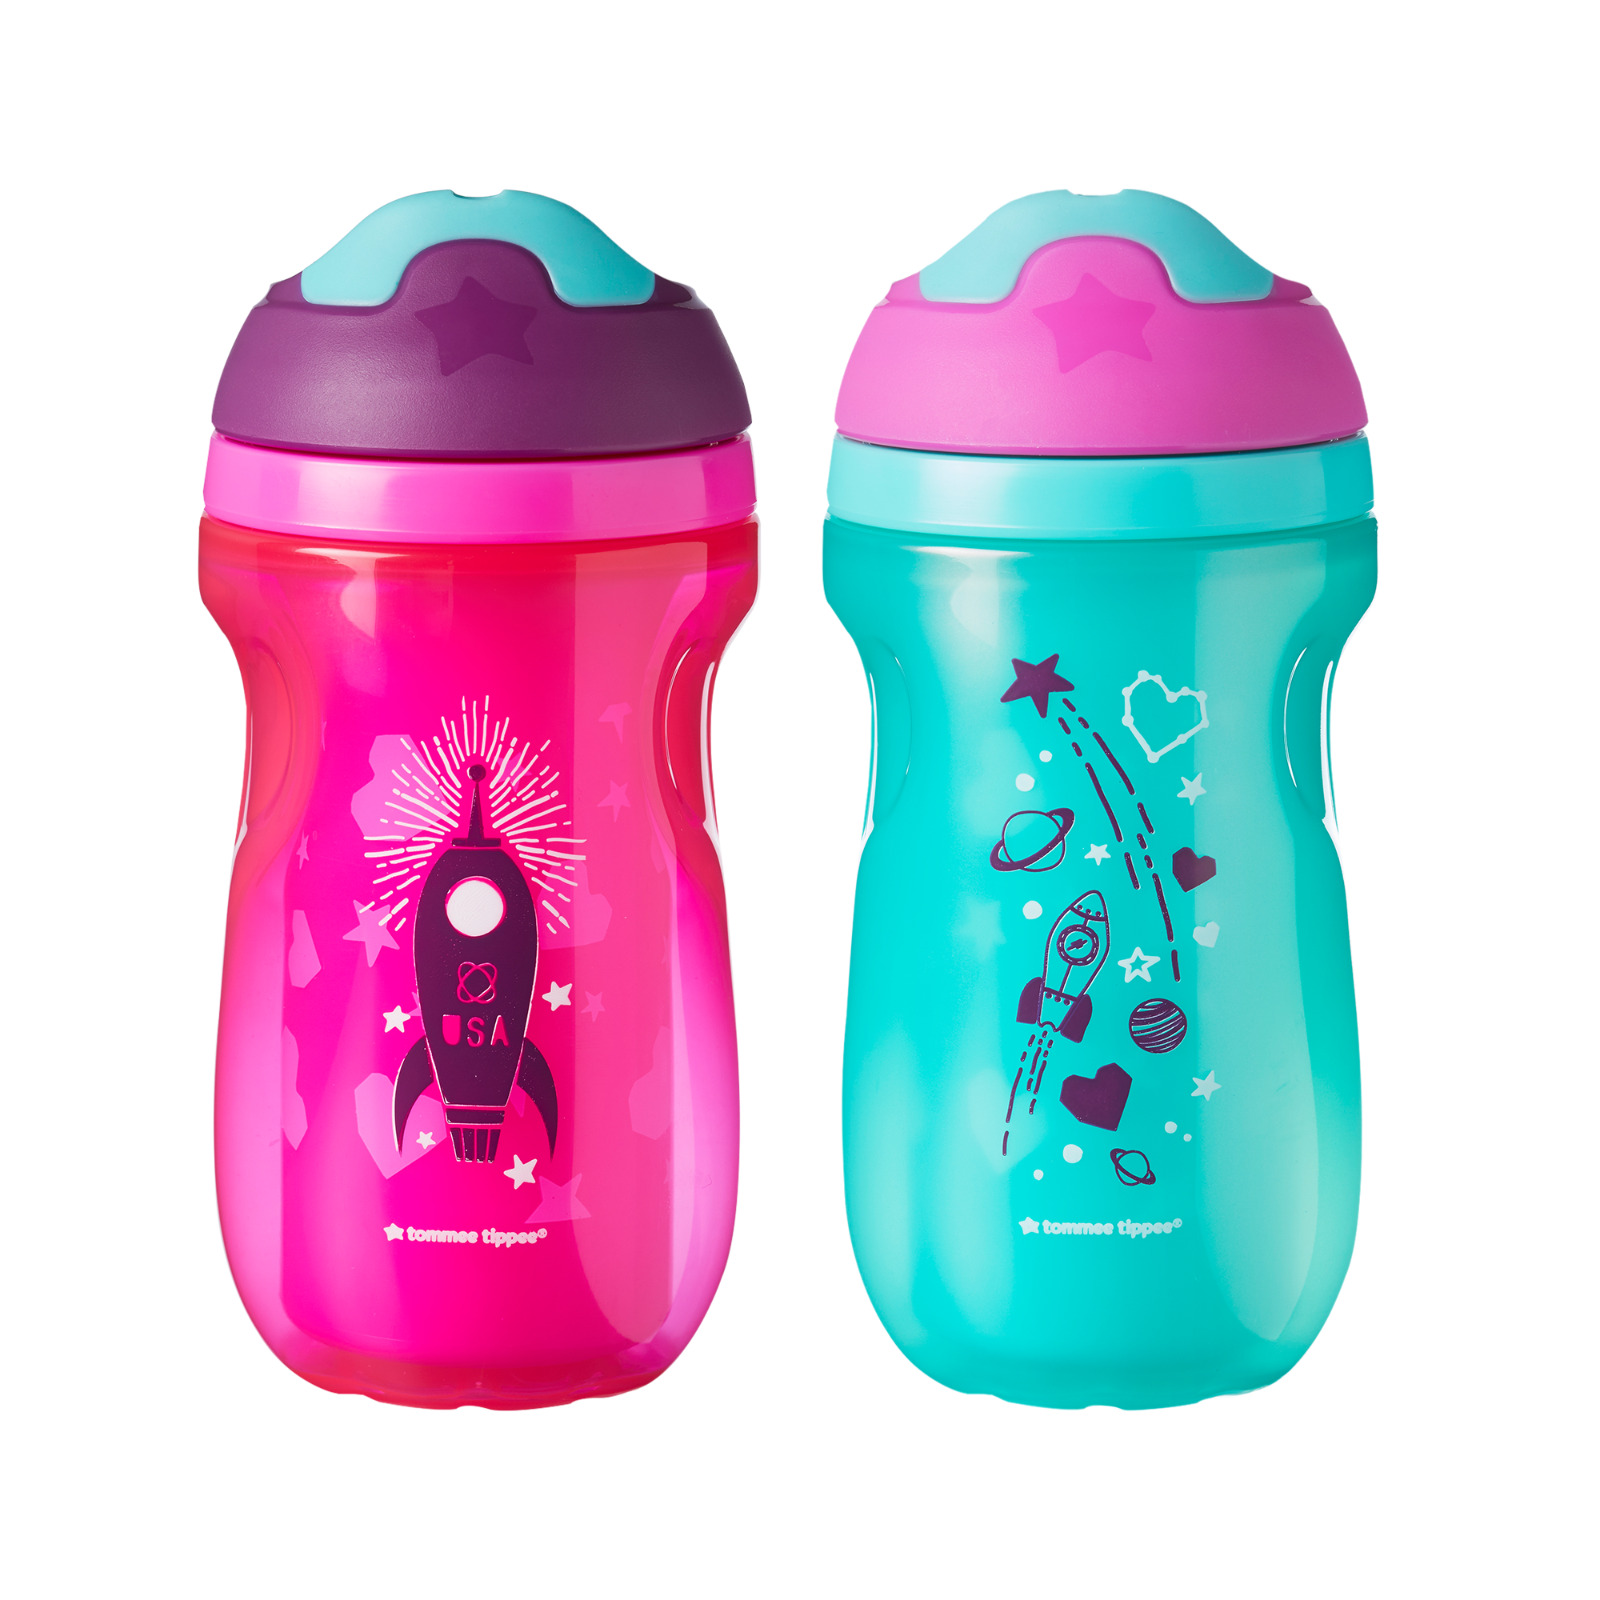 2 Pk Tommee Tippee Insulated Sippee Toddler Tumbler Cup 12+ Months Pink & Teal